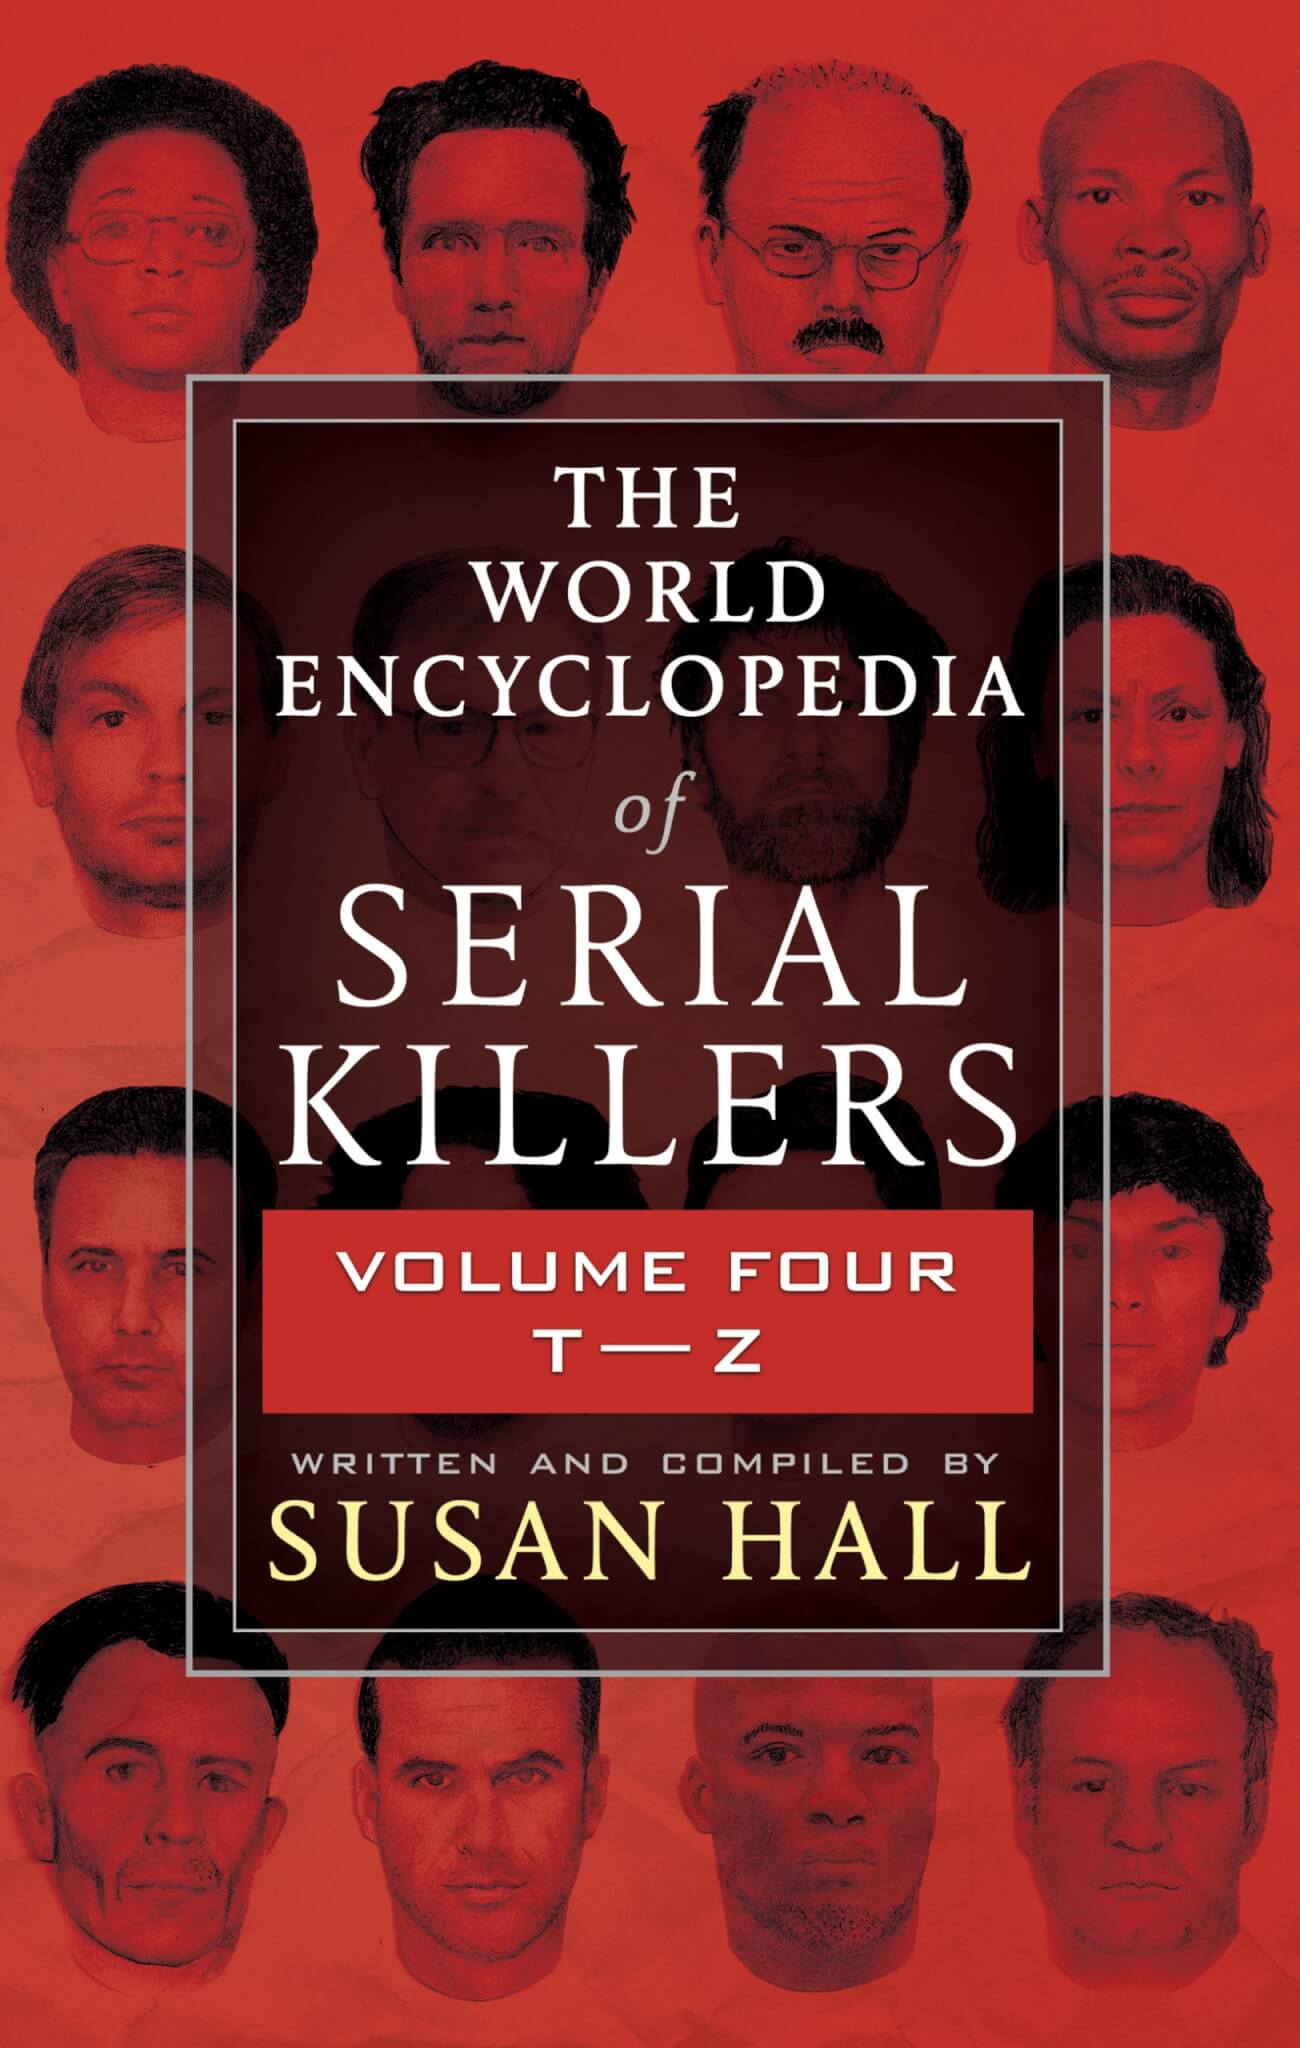 The World Encyclopedia Of Serial Killers Volume Four:  - True CrimeCover Image